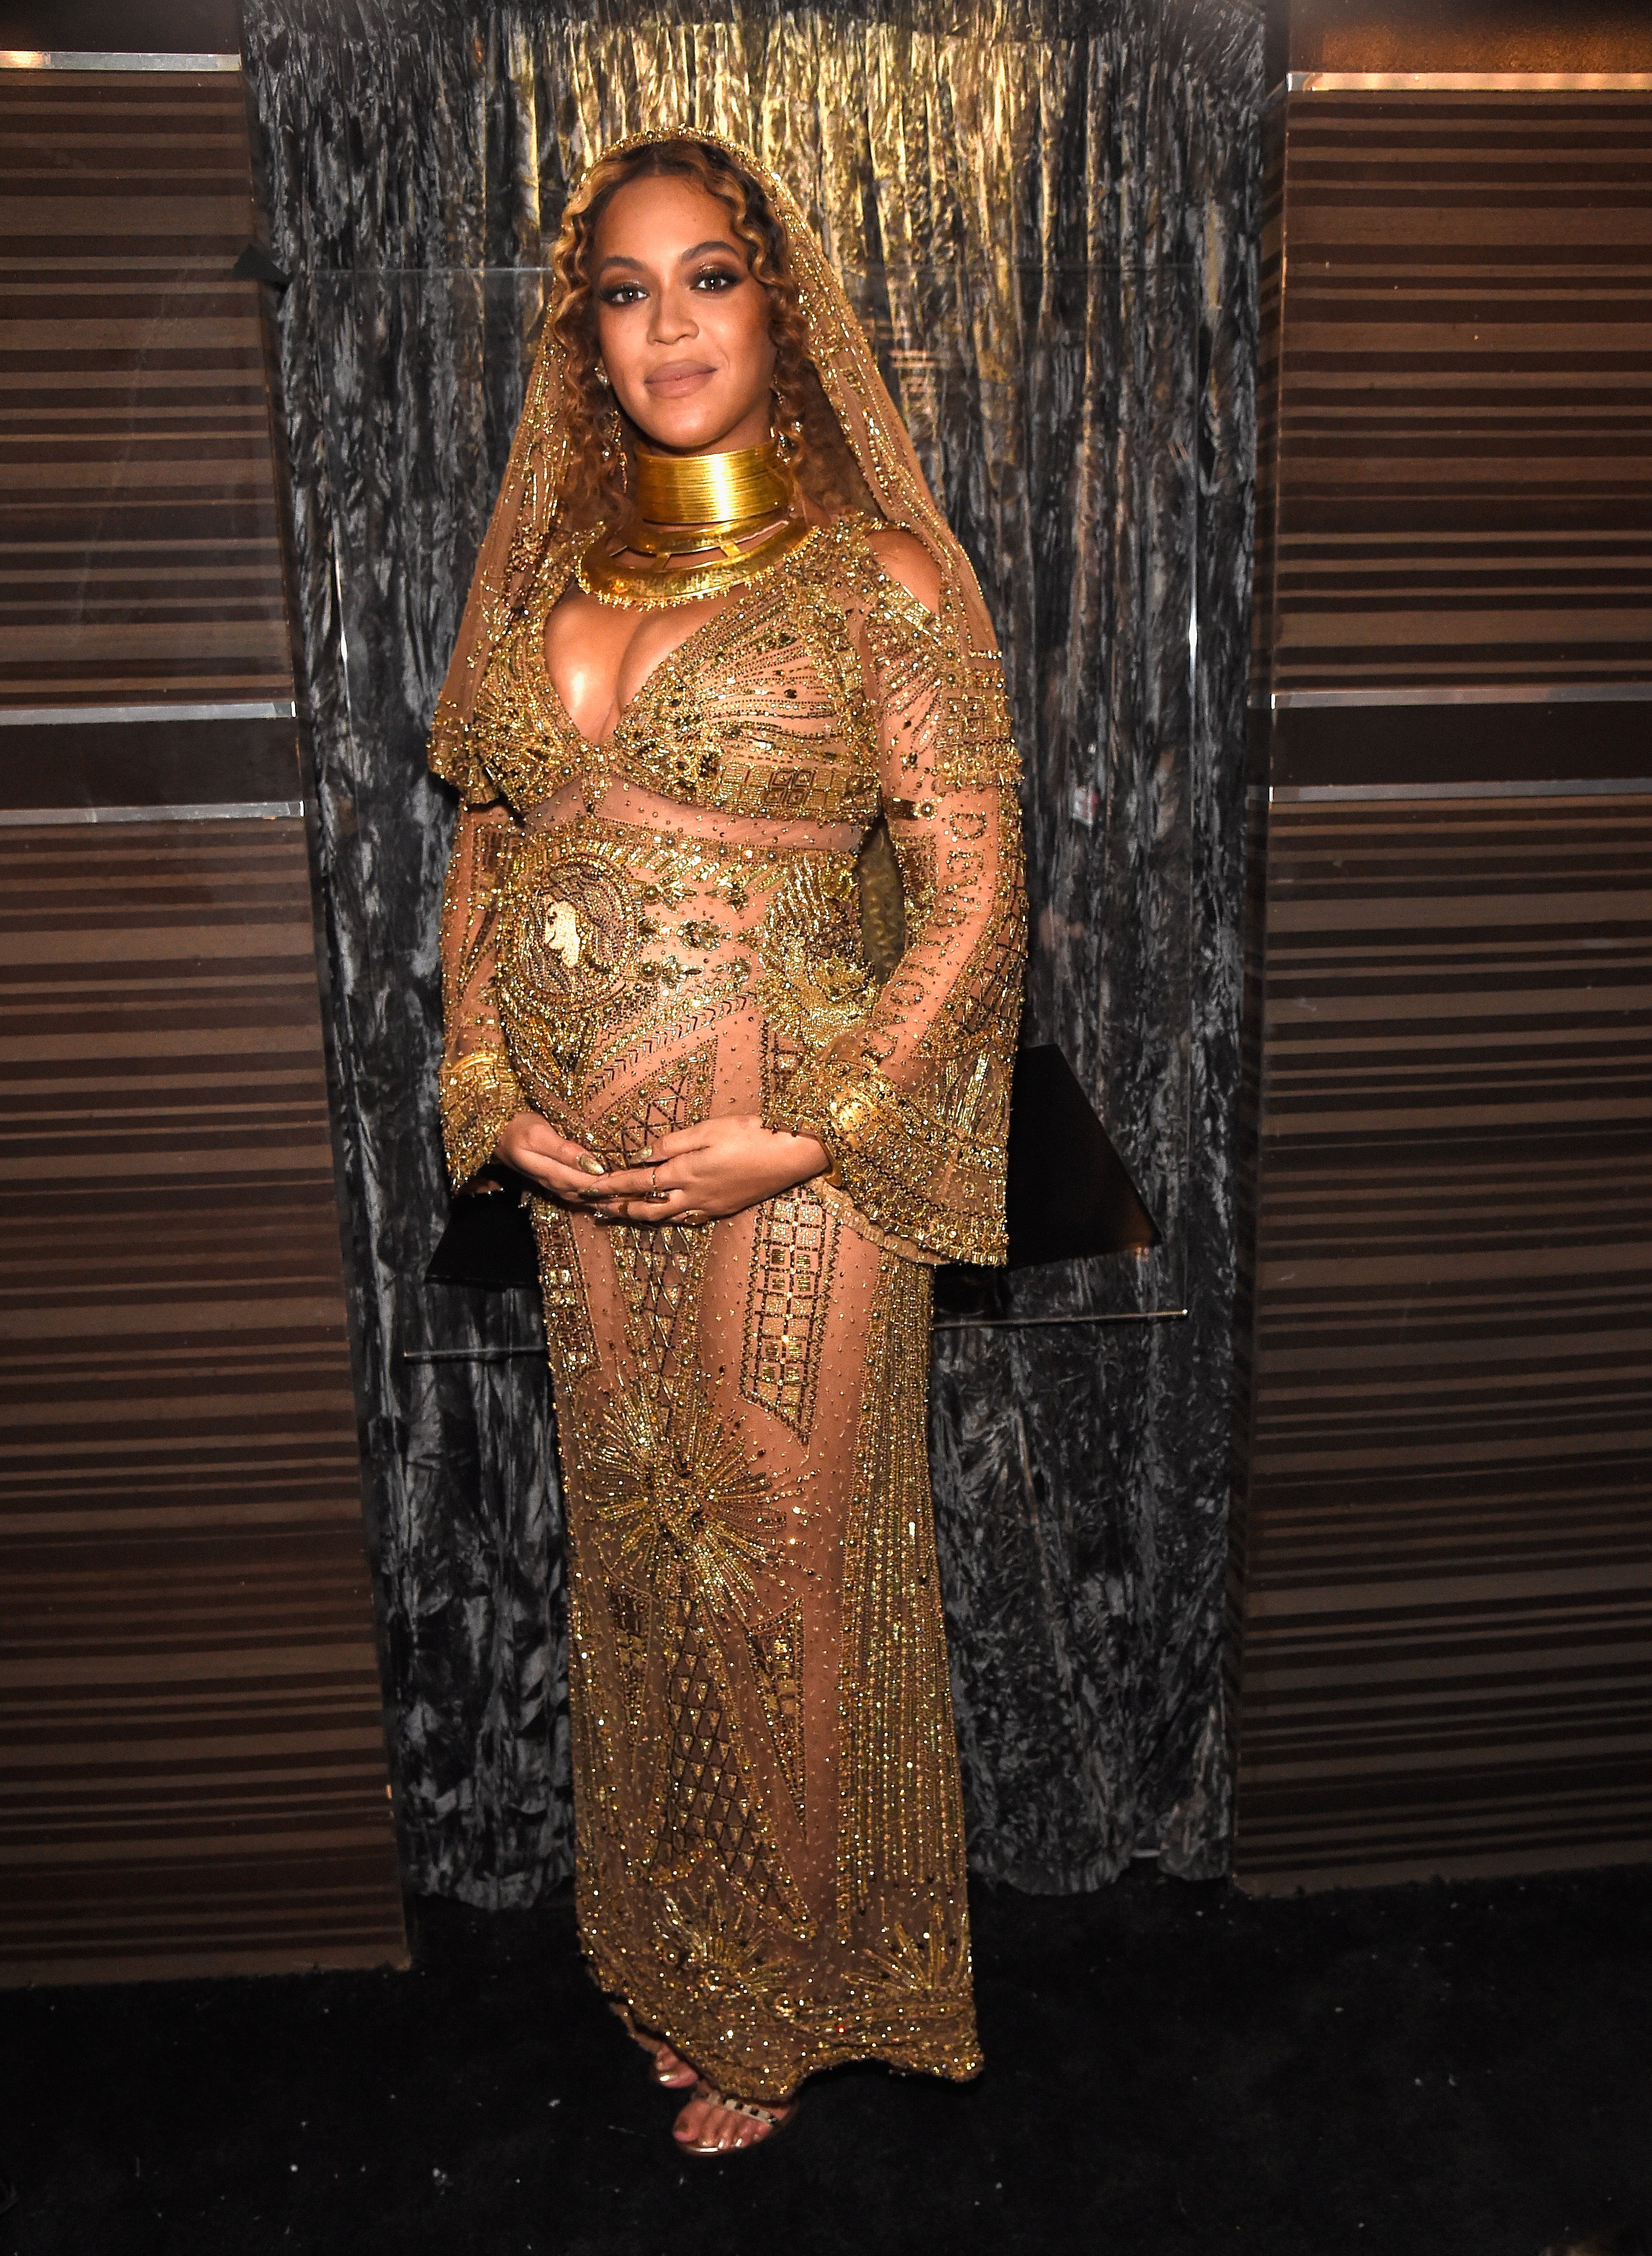 We Can't Get Over How Epic Beyonce's Pregnancy Style Is
